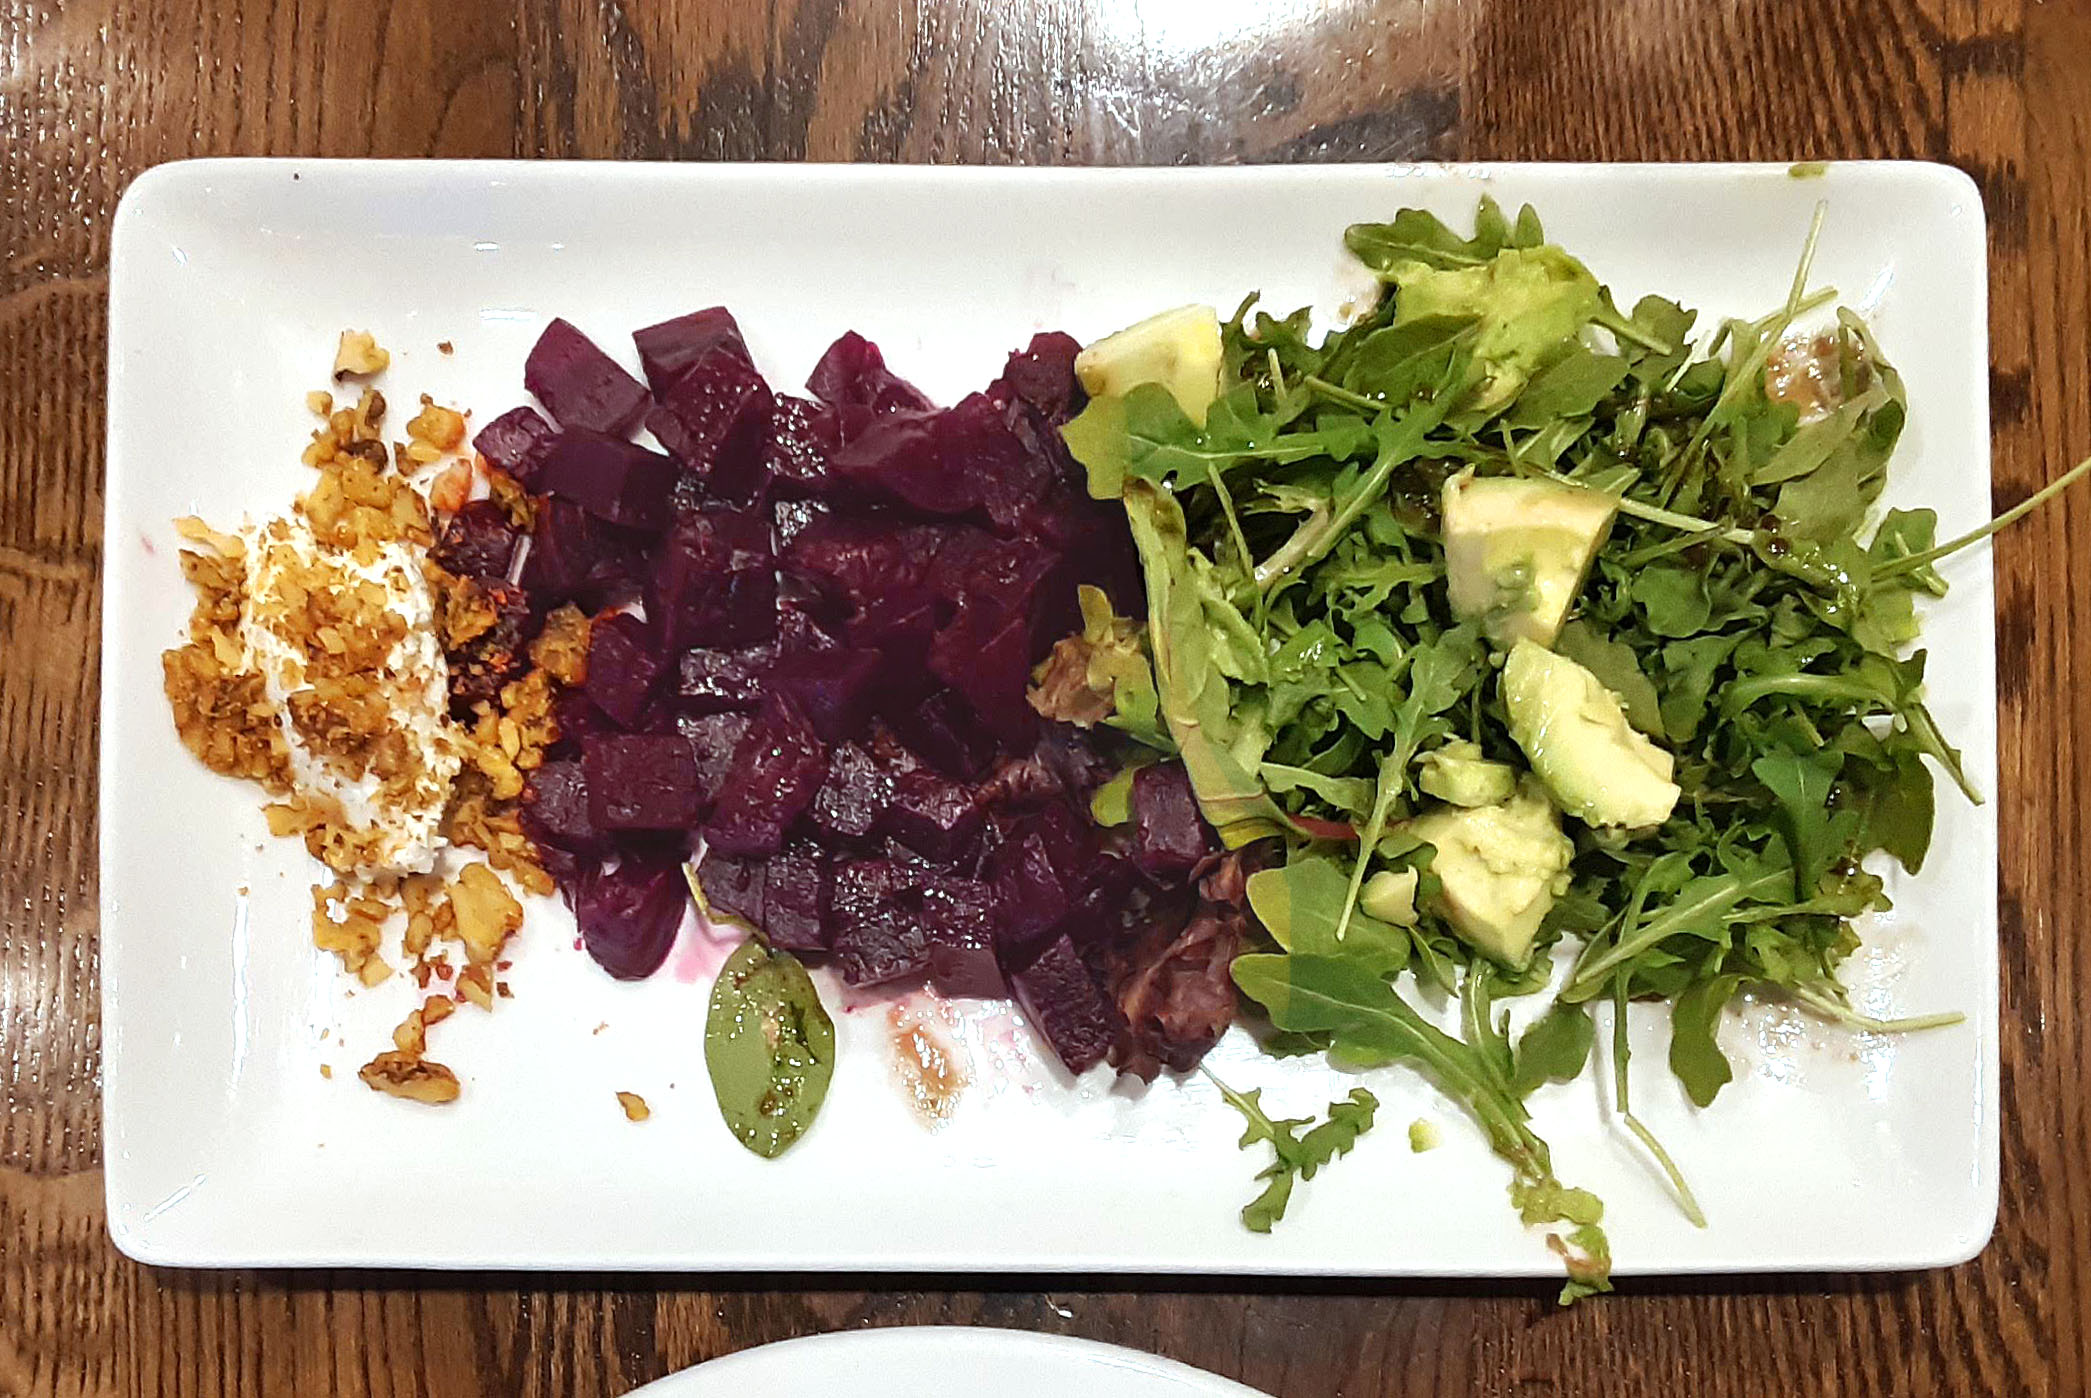 On a rectangular white plate, there are three apps: beets, avocado, and greens. Photo by Paul Young.